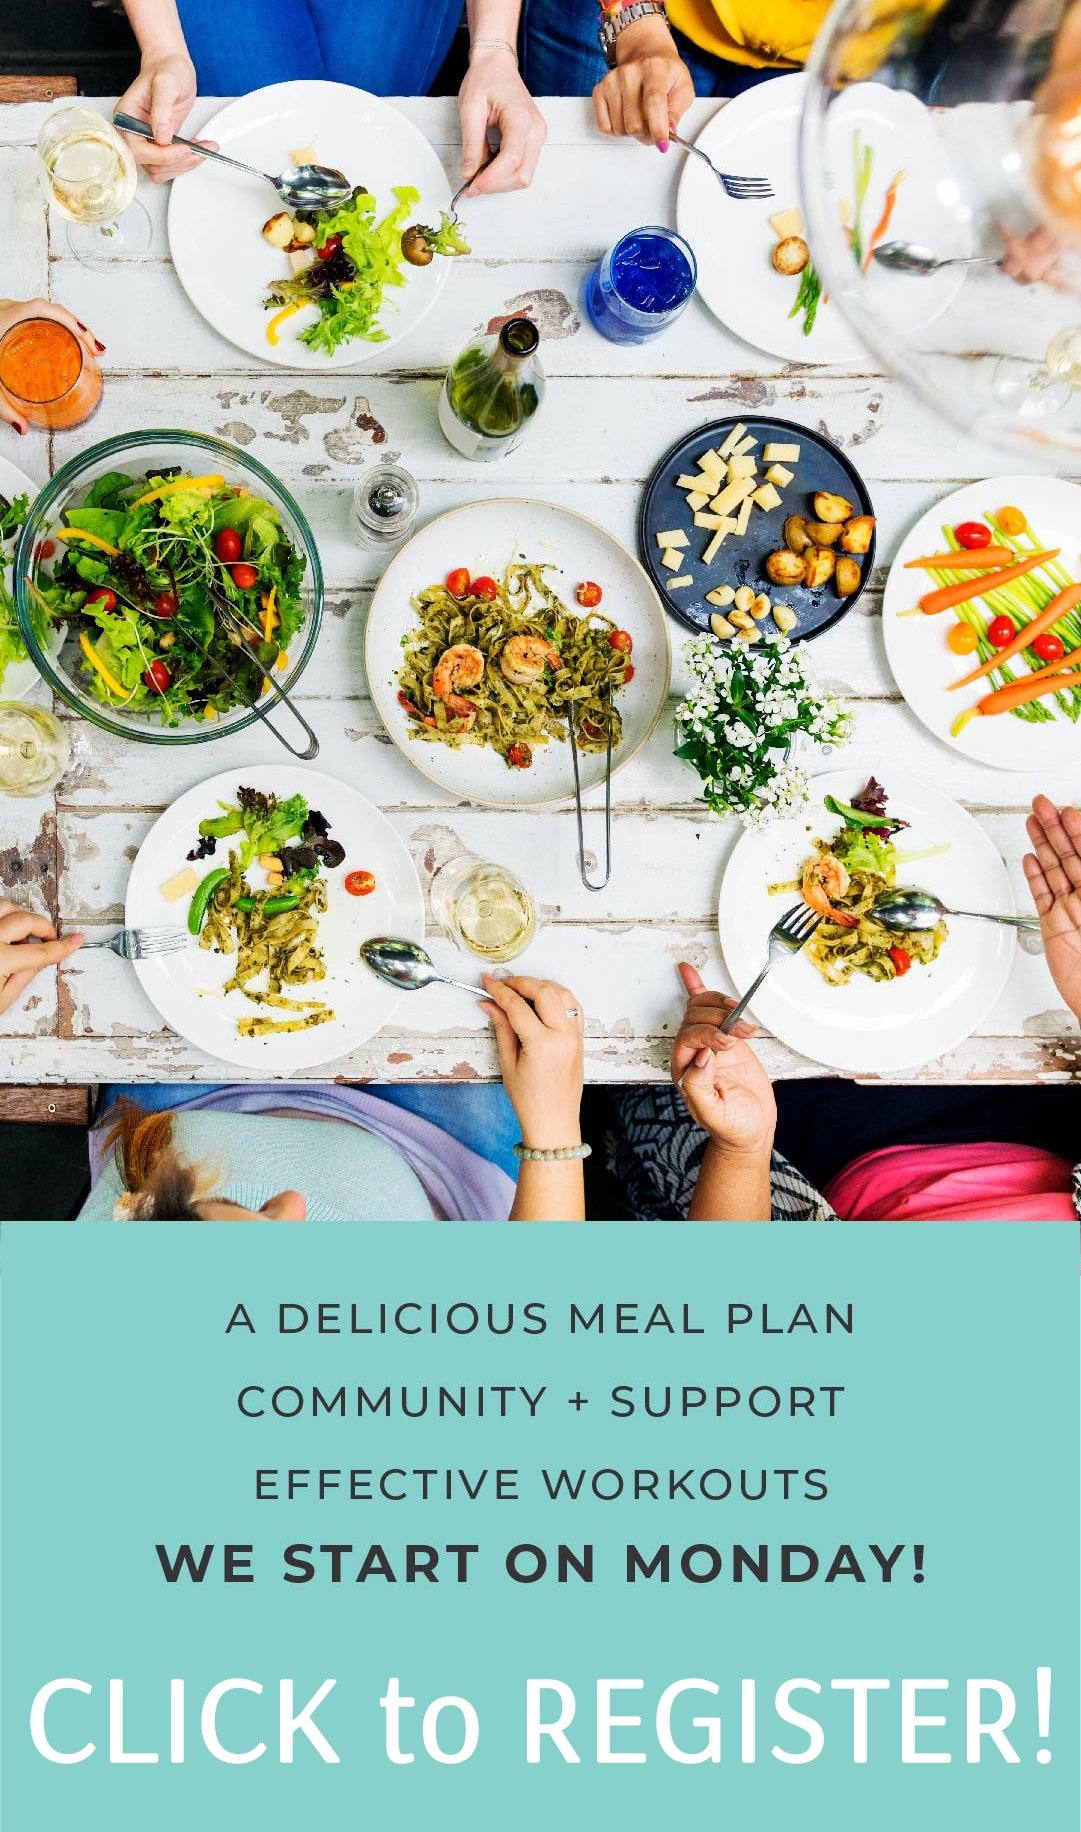 a delicious meal plan community support effective workouts we start on monday